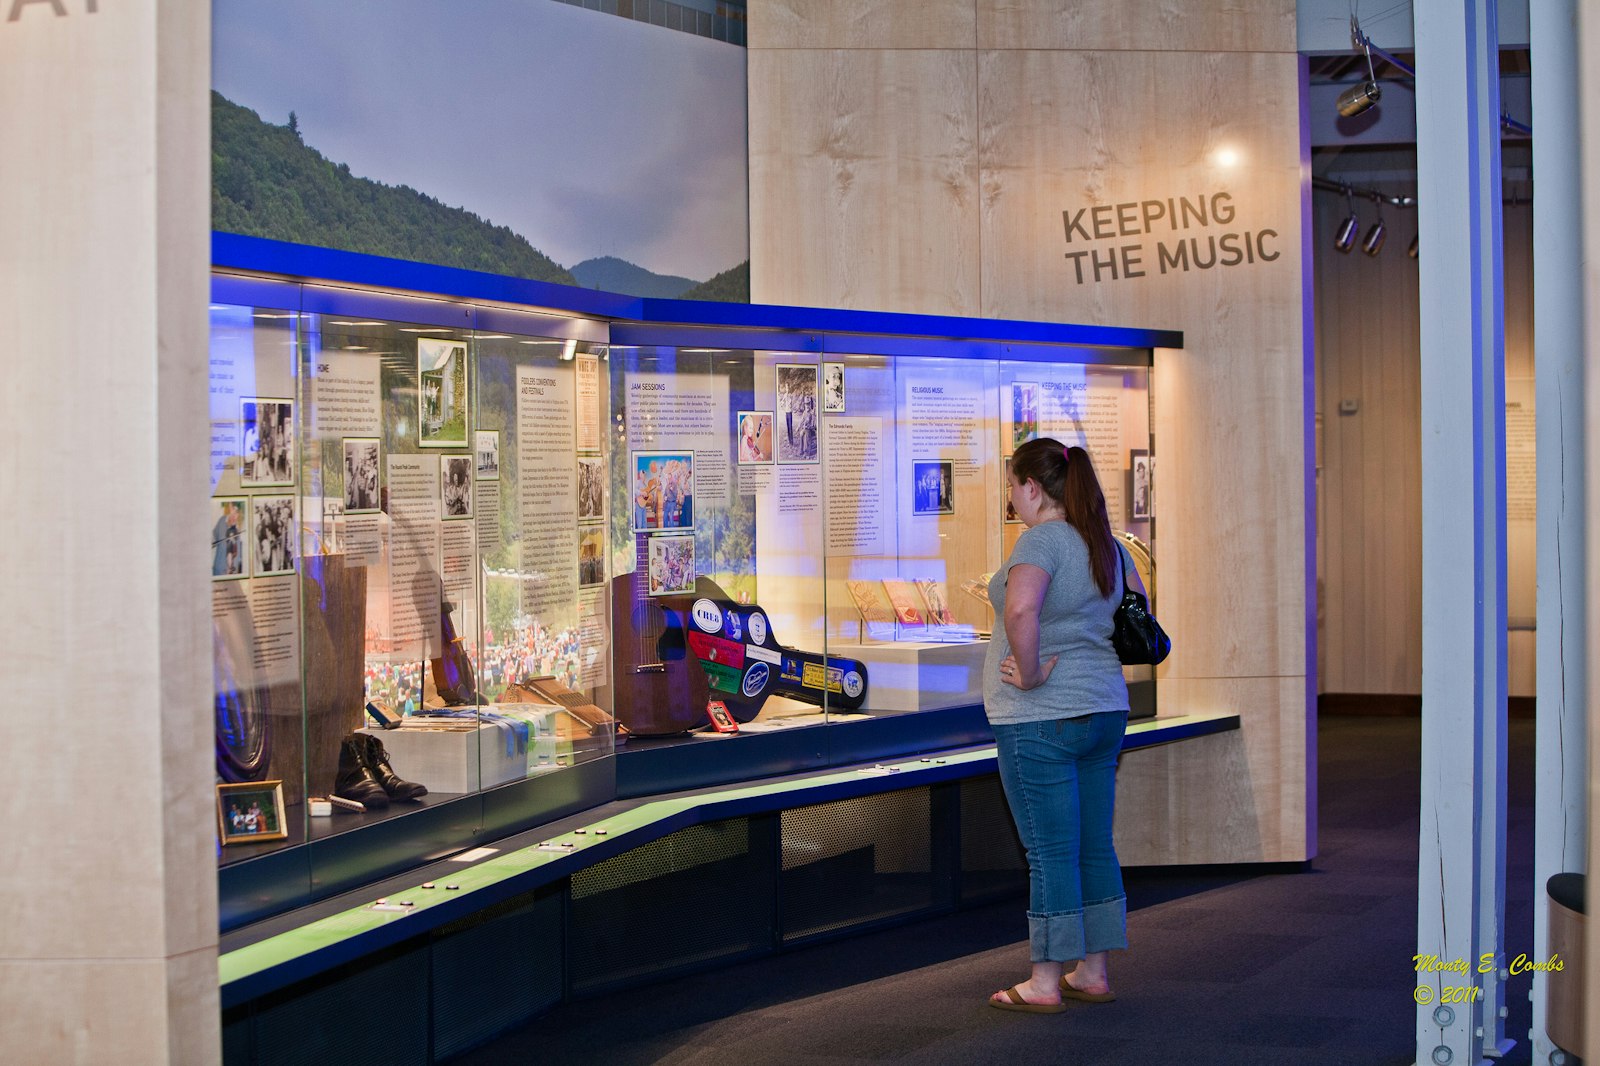 A person stands and looks at an exhibit about music behind glass